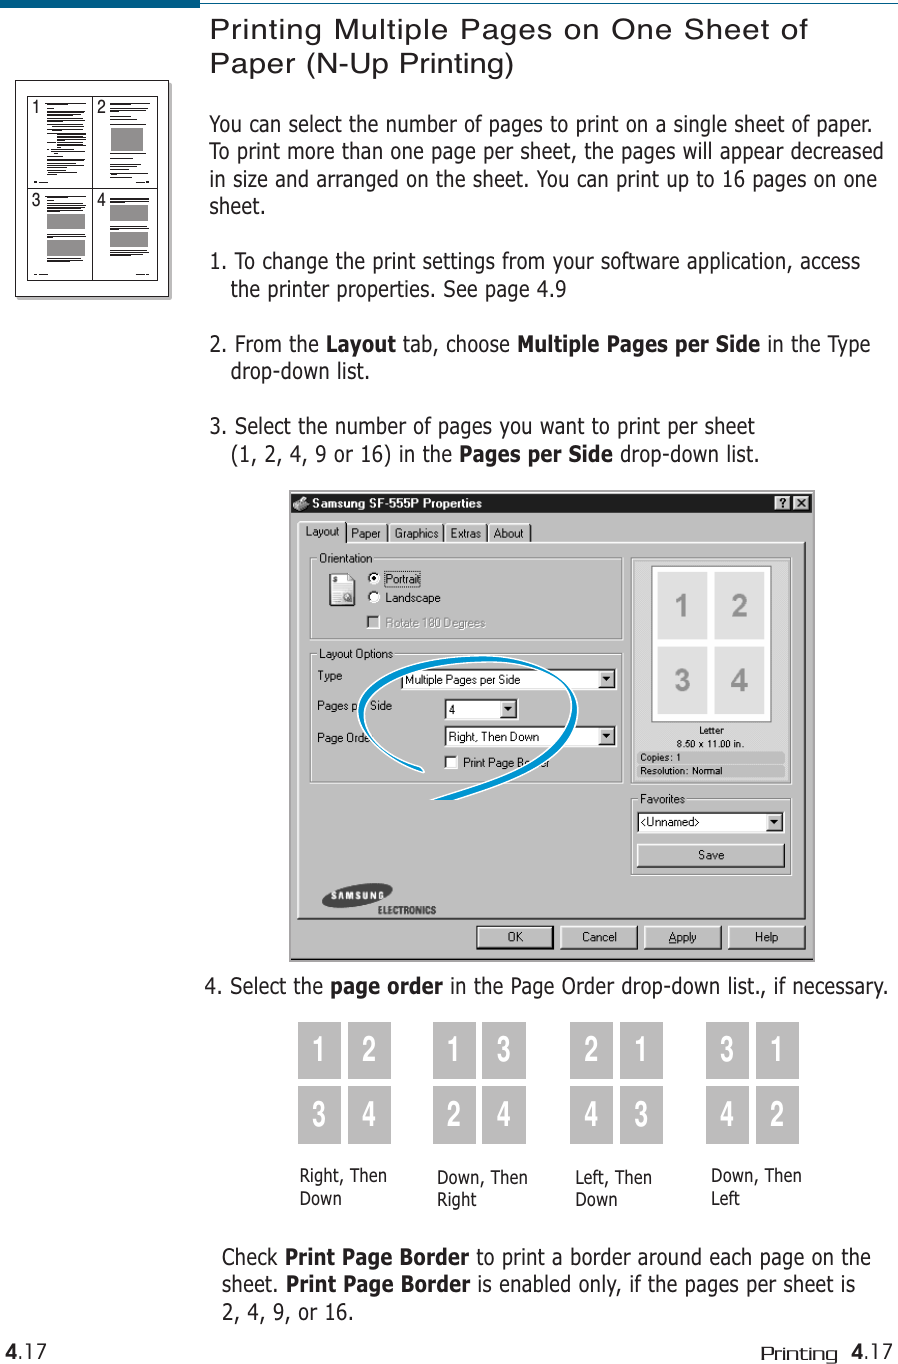 4.17Printing4.17Printing Multiple Pages on One Sheet ofPaper (N-Up Printing)You can select the number of pages to print on a single sheet of paper.To print more than one page per sheet, the pages will appear decreasedin size and arranged on the sheet. You can print up to 16 pages on onesheet.1. To change the print settings from your software application, access the printer properties. See page 4.92. From the Layout tab, choose Multiple Pages per Side in the Type drop-down list.3. Select the number of pages you want to print per sheet (1, 2, 4, 9 or 16) in the Pages per Side drop-down list.1 23 44. Select the page order in the Page Order drop-down list., if necessary.1324123424133412Right, ThenDownDown, ThenRightLeft, ThenDownDown, ThenLeftCheck Print Page Border to print a border around each page on the sheet. Print Page Border is enabled only, if the pages per sheet is 2, 4, 9, or 16.